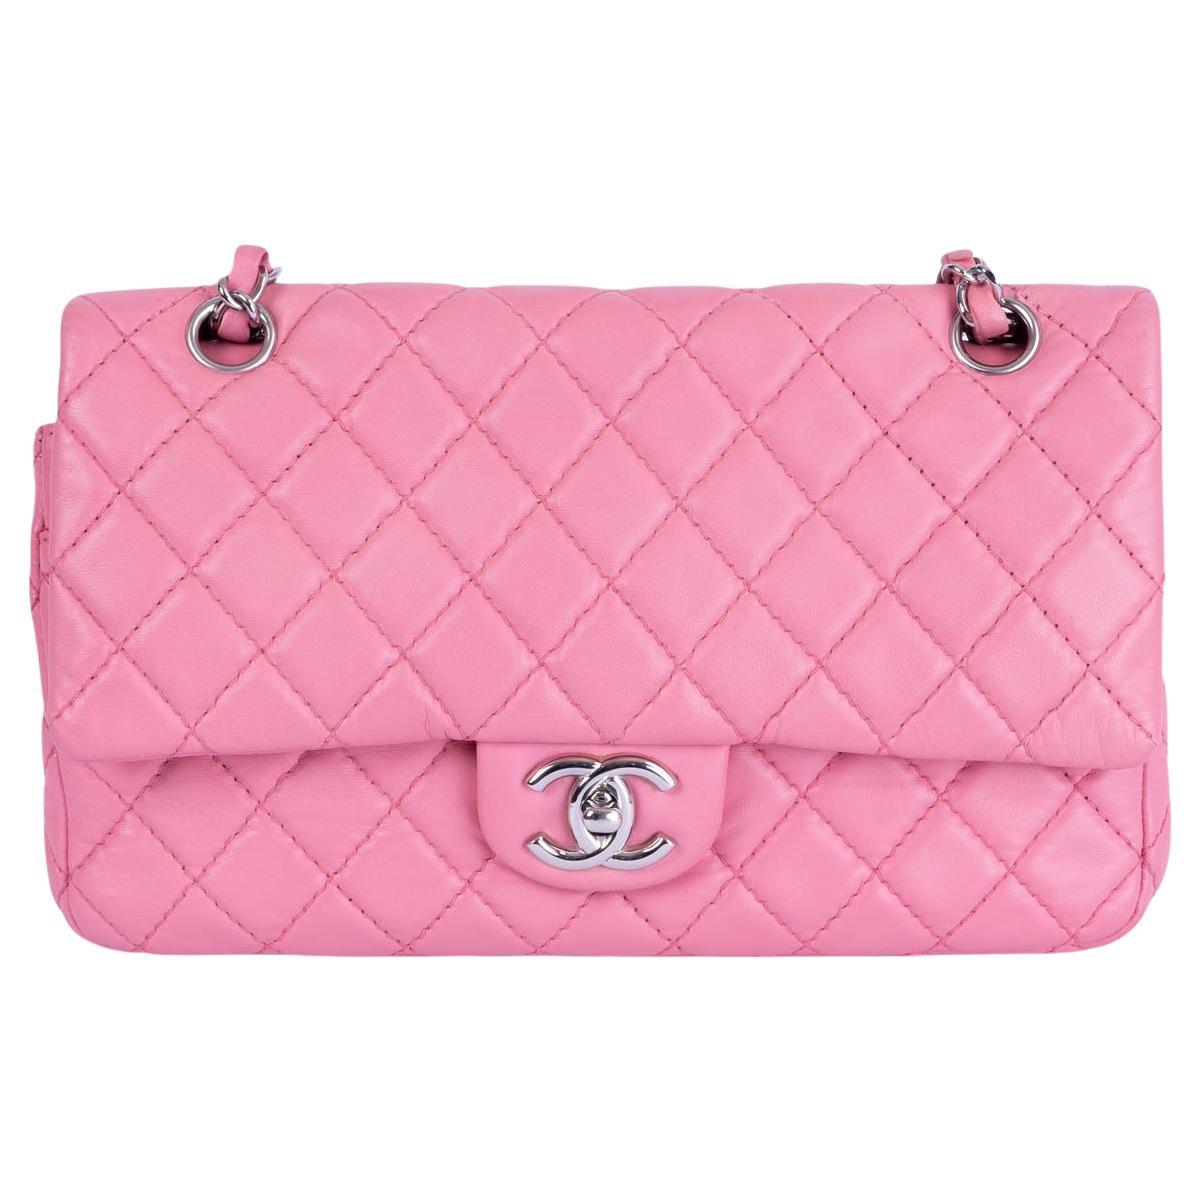 Chanel Pink Quilted Lambskin Leather Soft Classic Medium Timeless Shoulder Bag